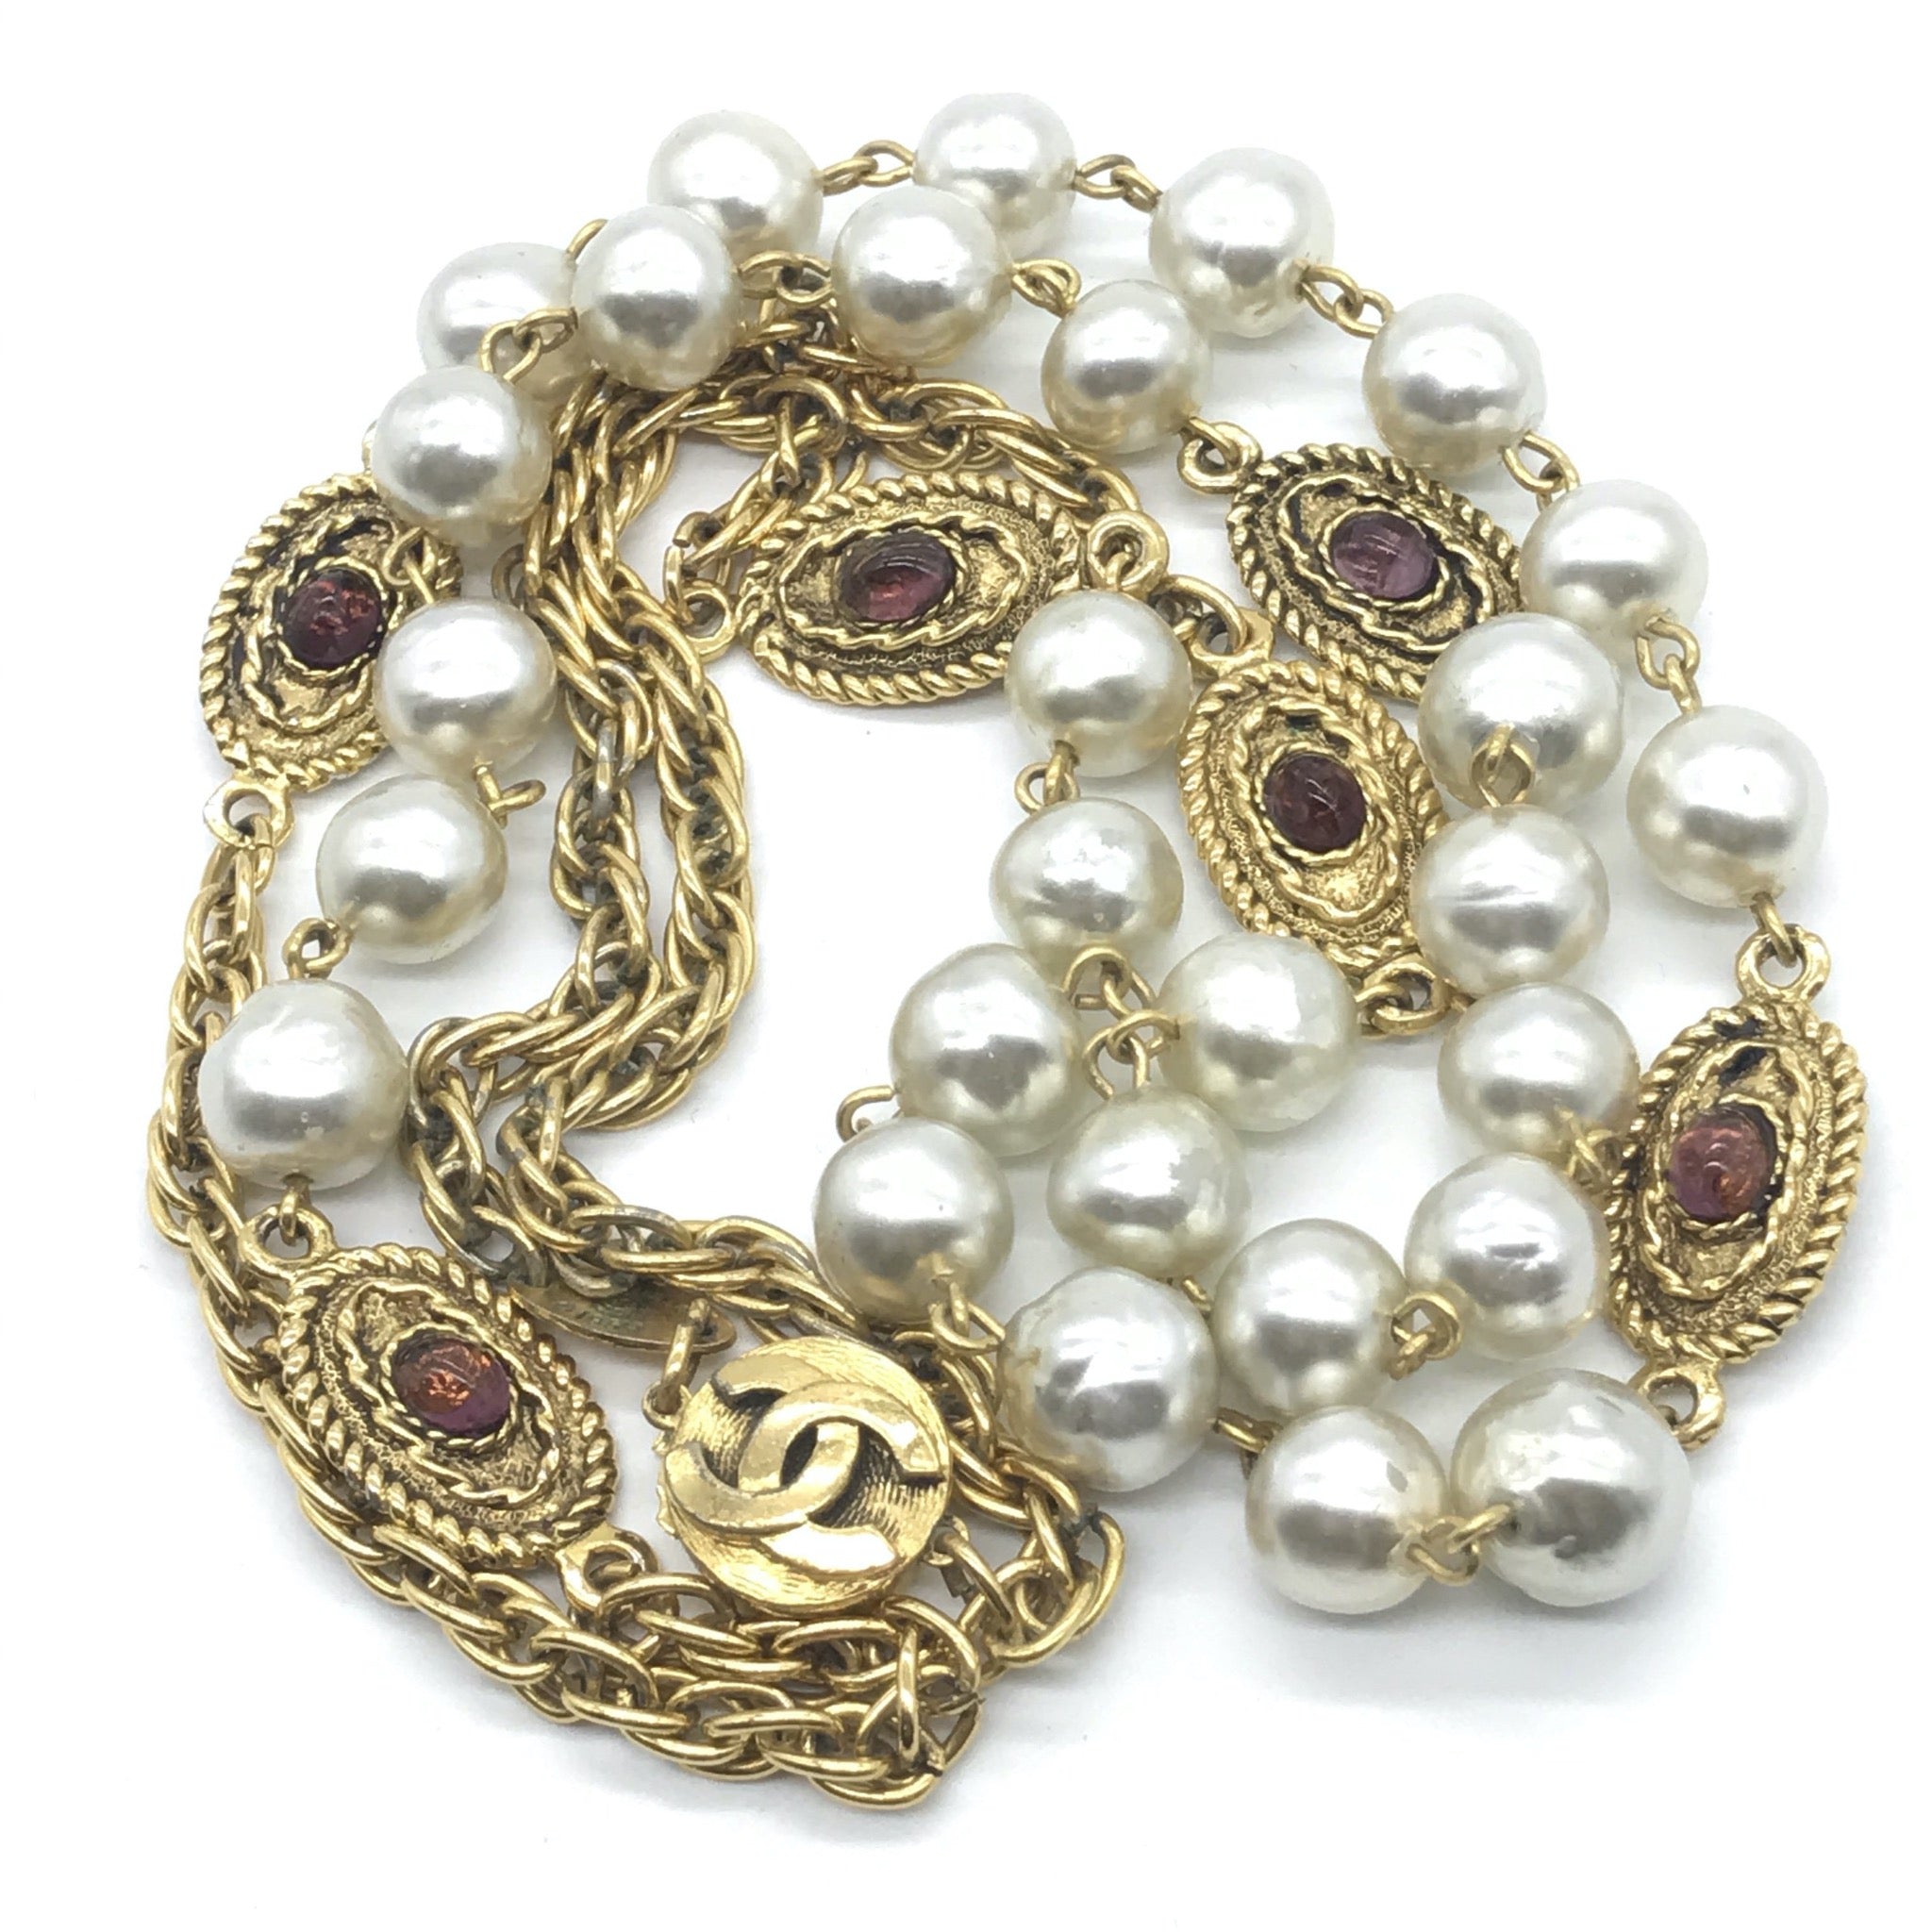 chanel pearl charm necklace vintage